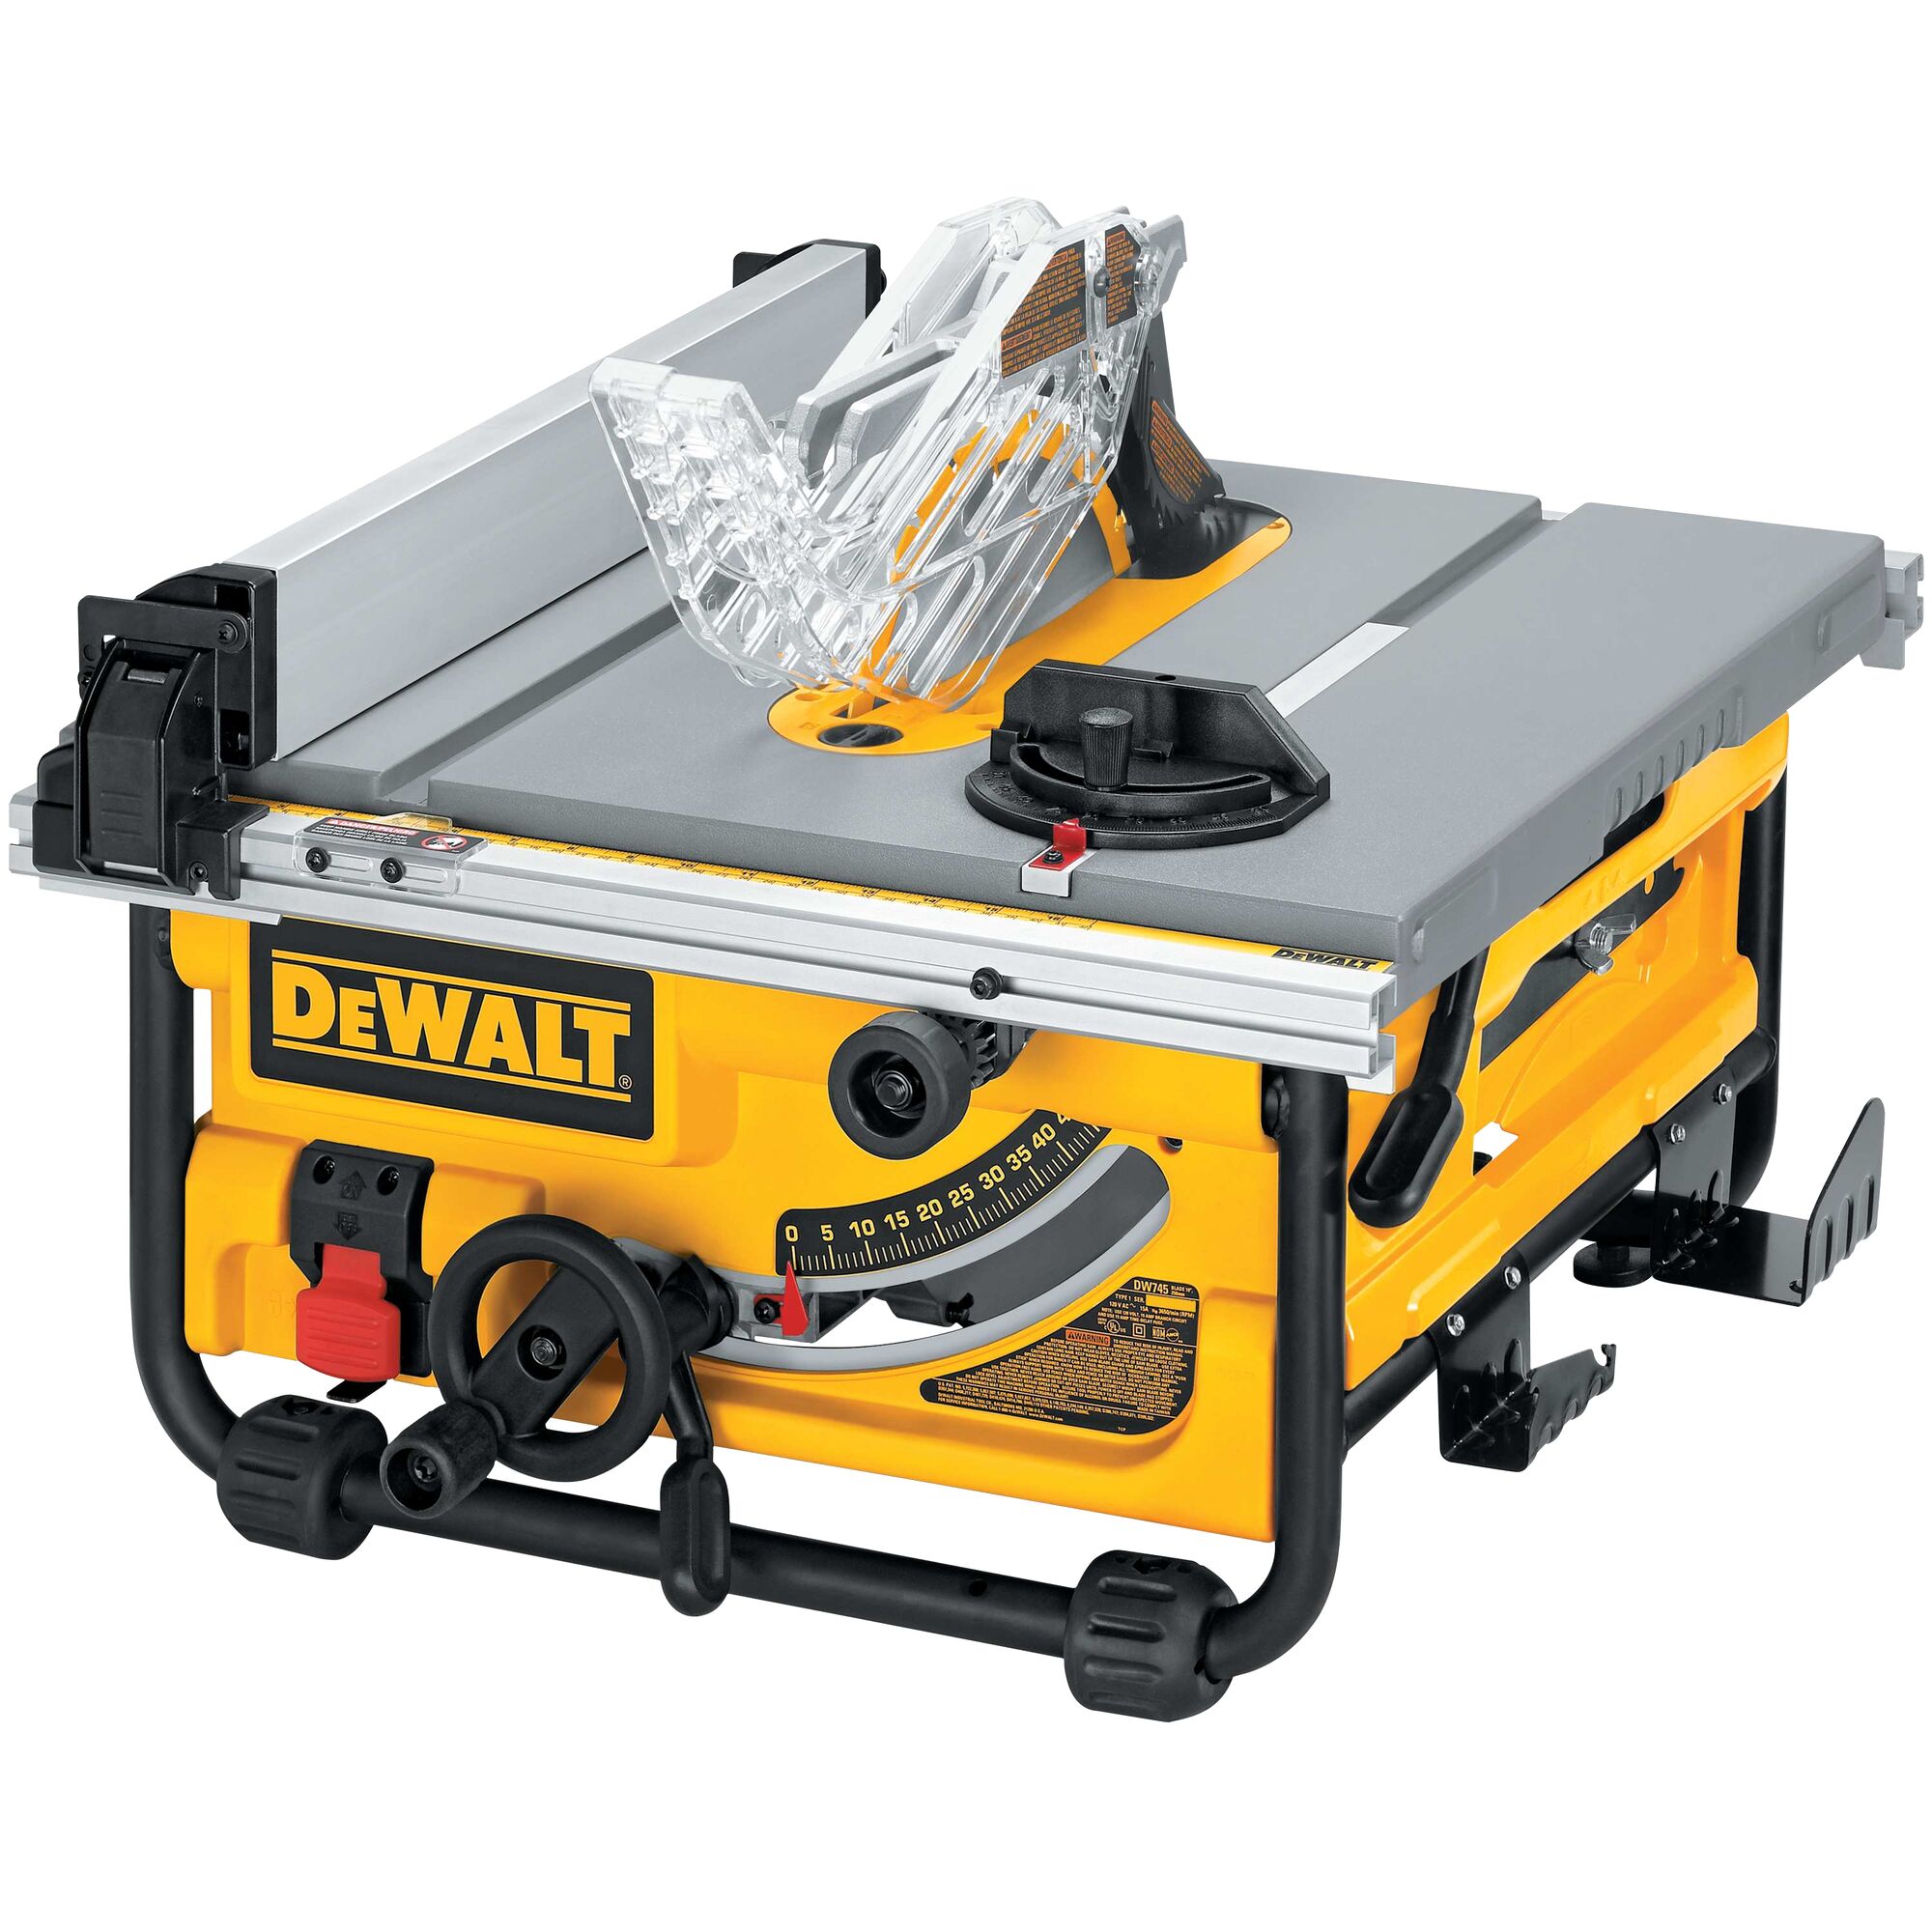 DEWALT 10-in 15-Amp Benchtop Table Saw with Folding in the Table Saws at